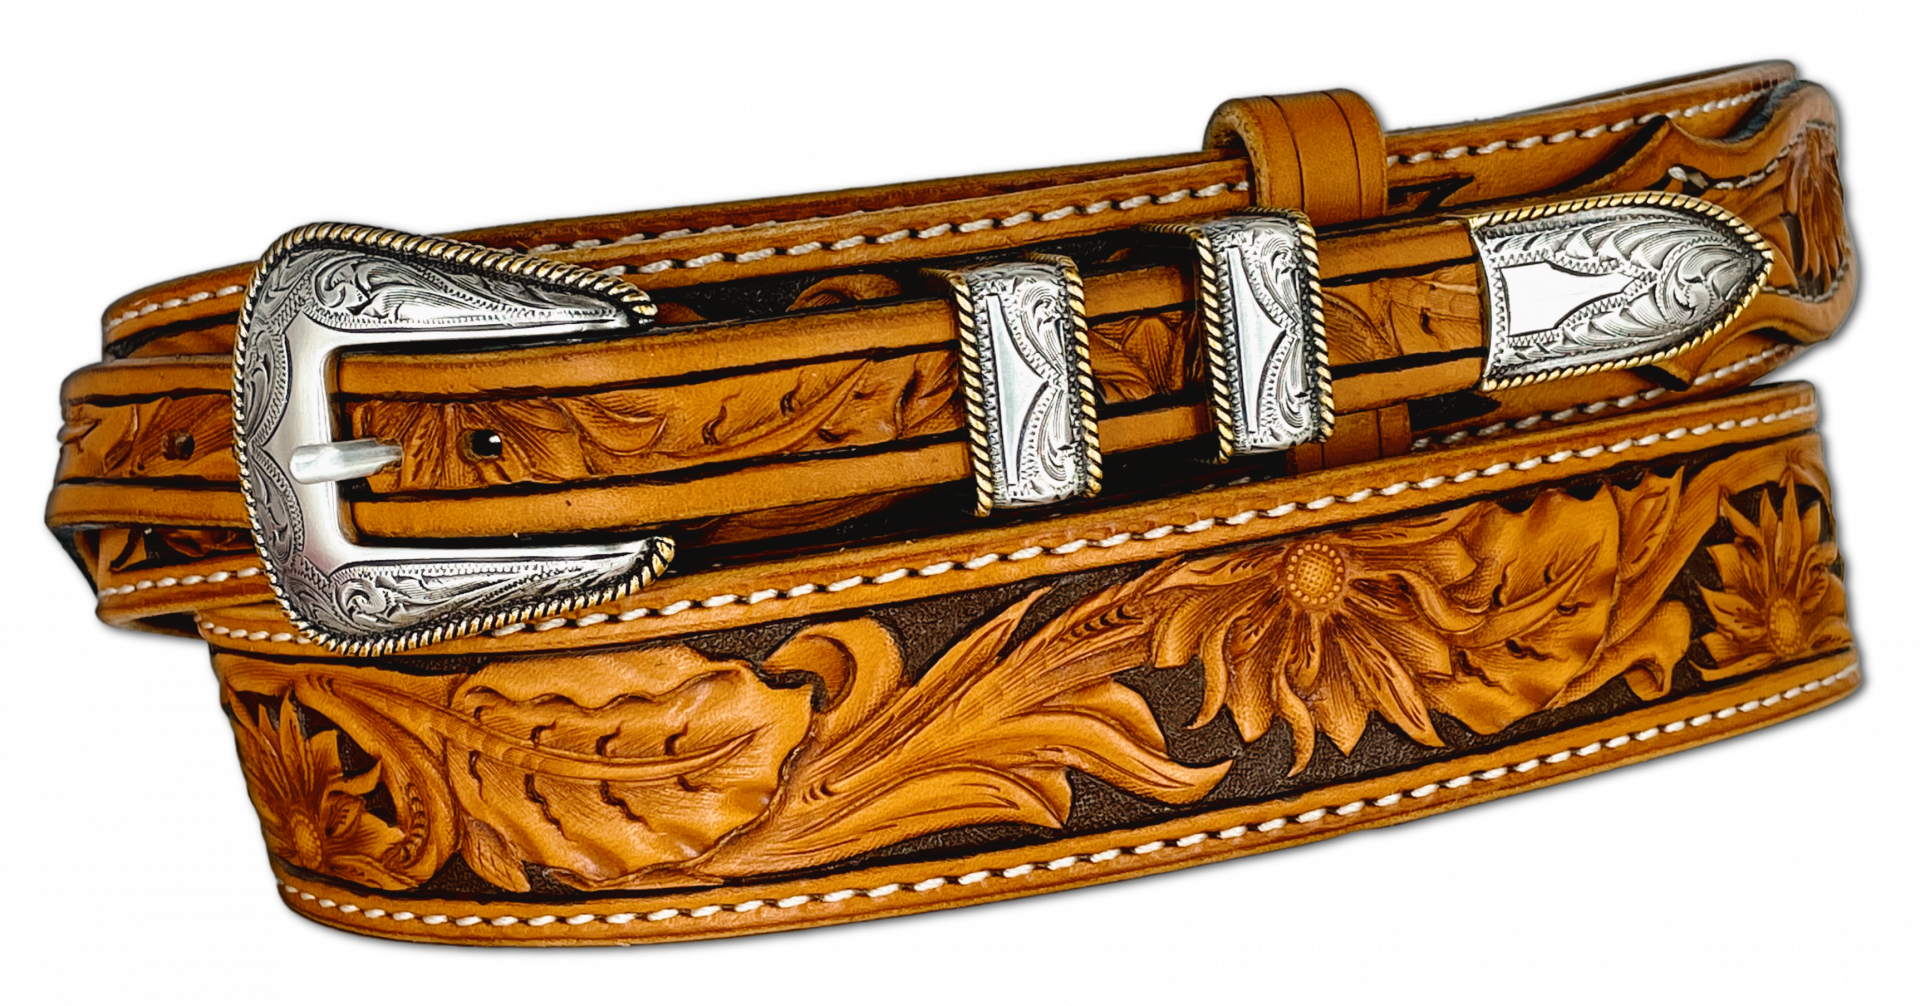 Custom Hand-Tooled Leather Belt with Spots – Crooked Horn Leather Company